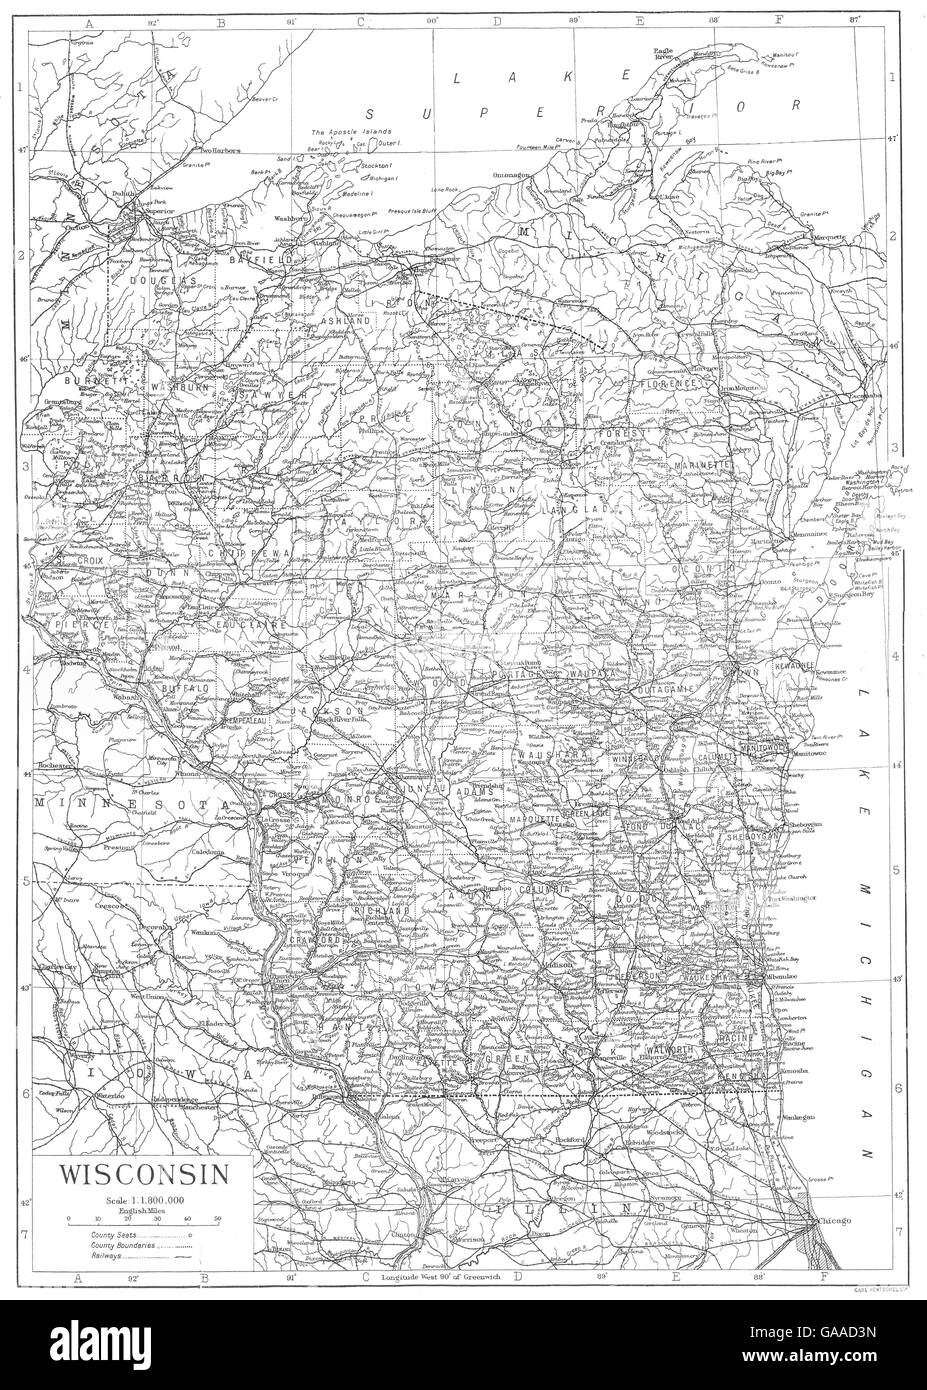 WISCONSIN: Wisconsin state map showing counties, 1910 Stock Photo